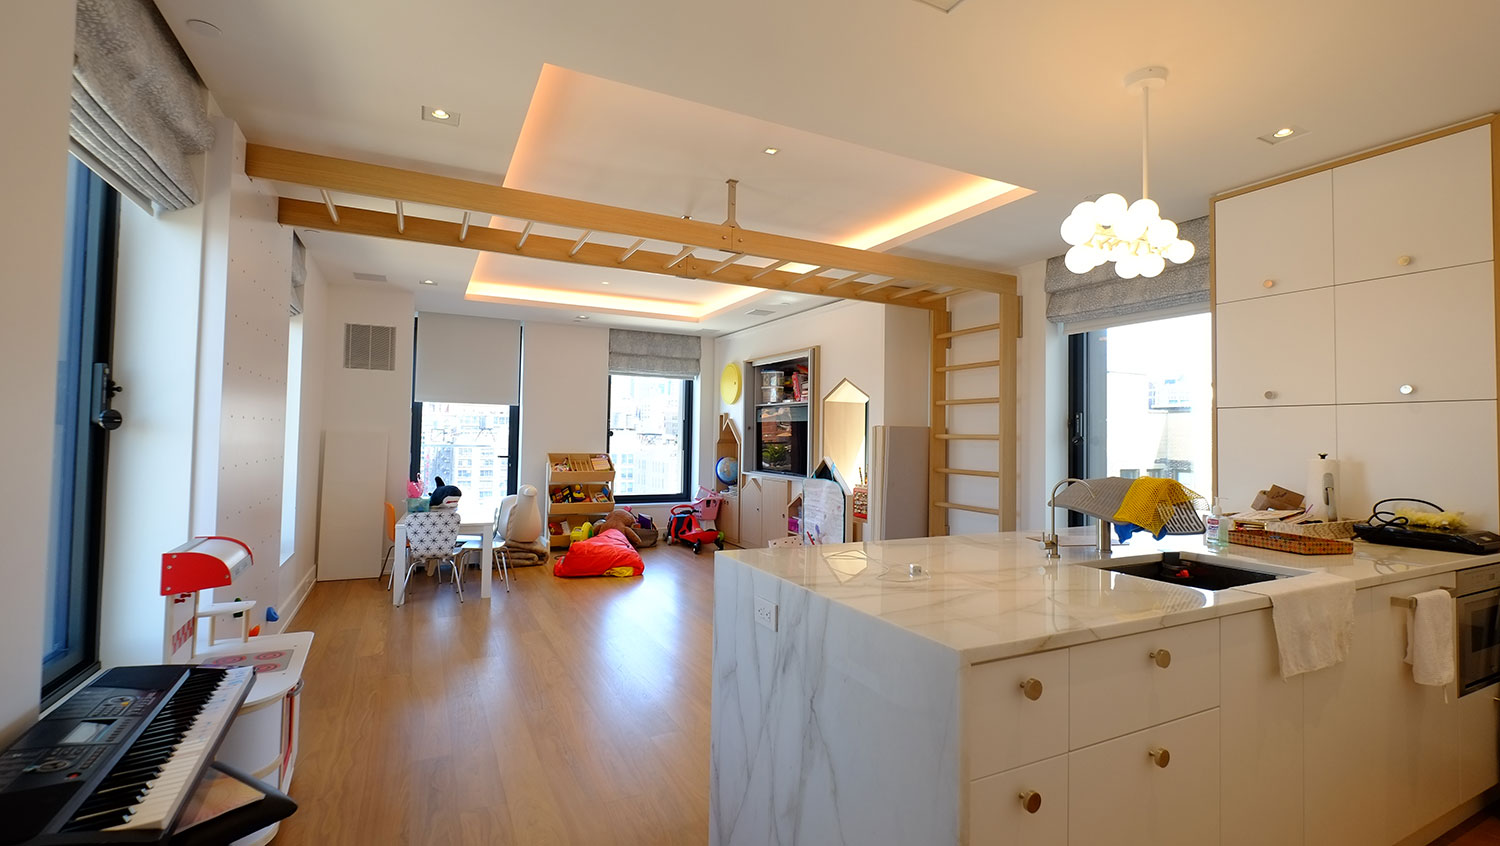 Union Square 5 Bedroom Triplex With Roof Deck Gut Renovation